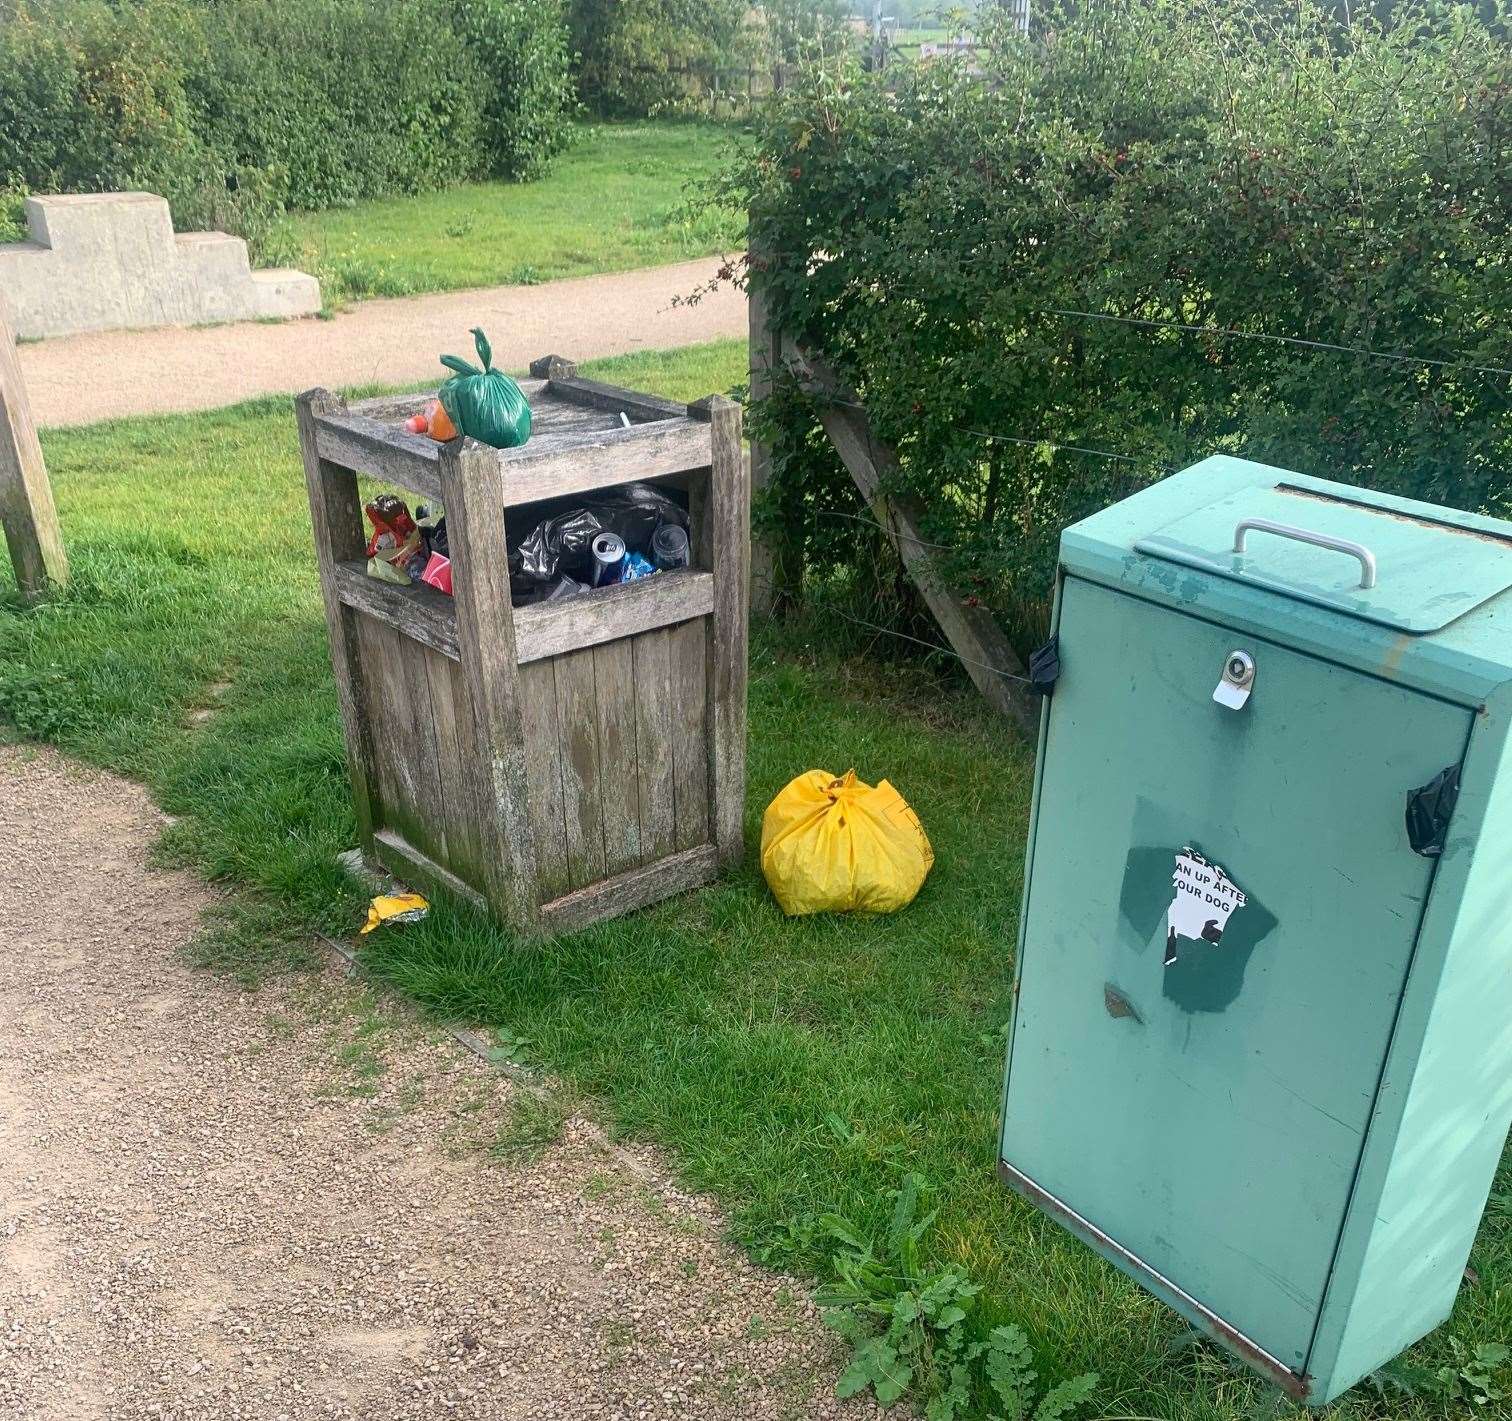 Those who live at Finberry, Ashford, have had to get used to overflowing bins. Picture: Siobhan Lyell